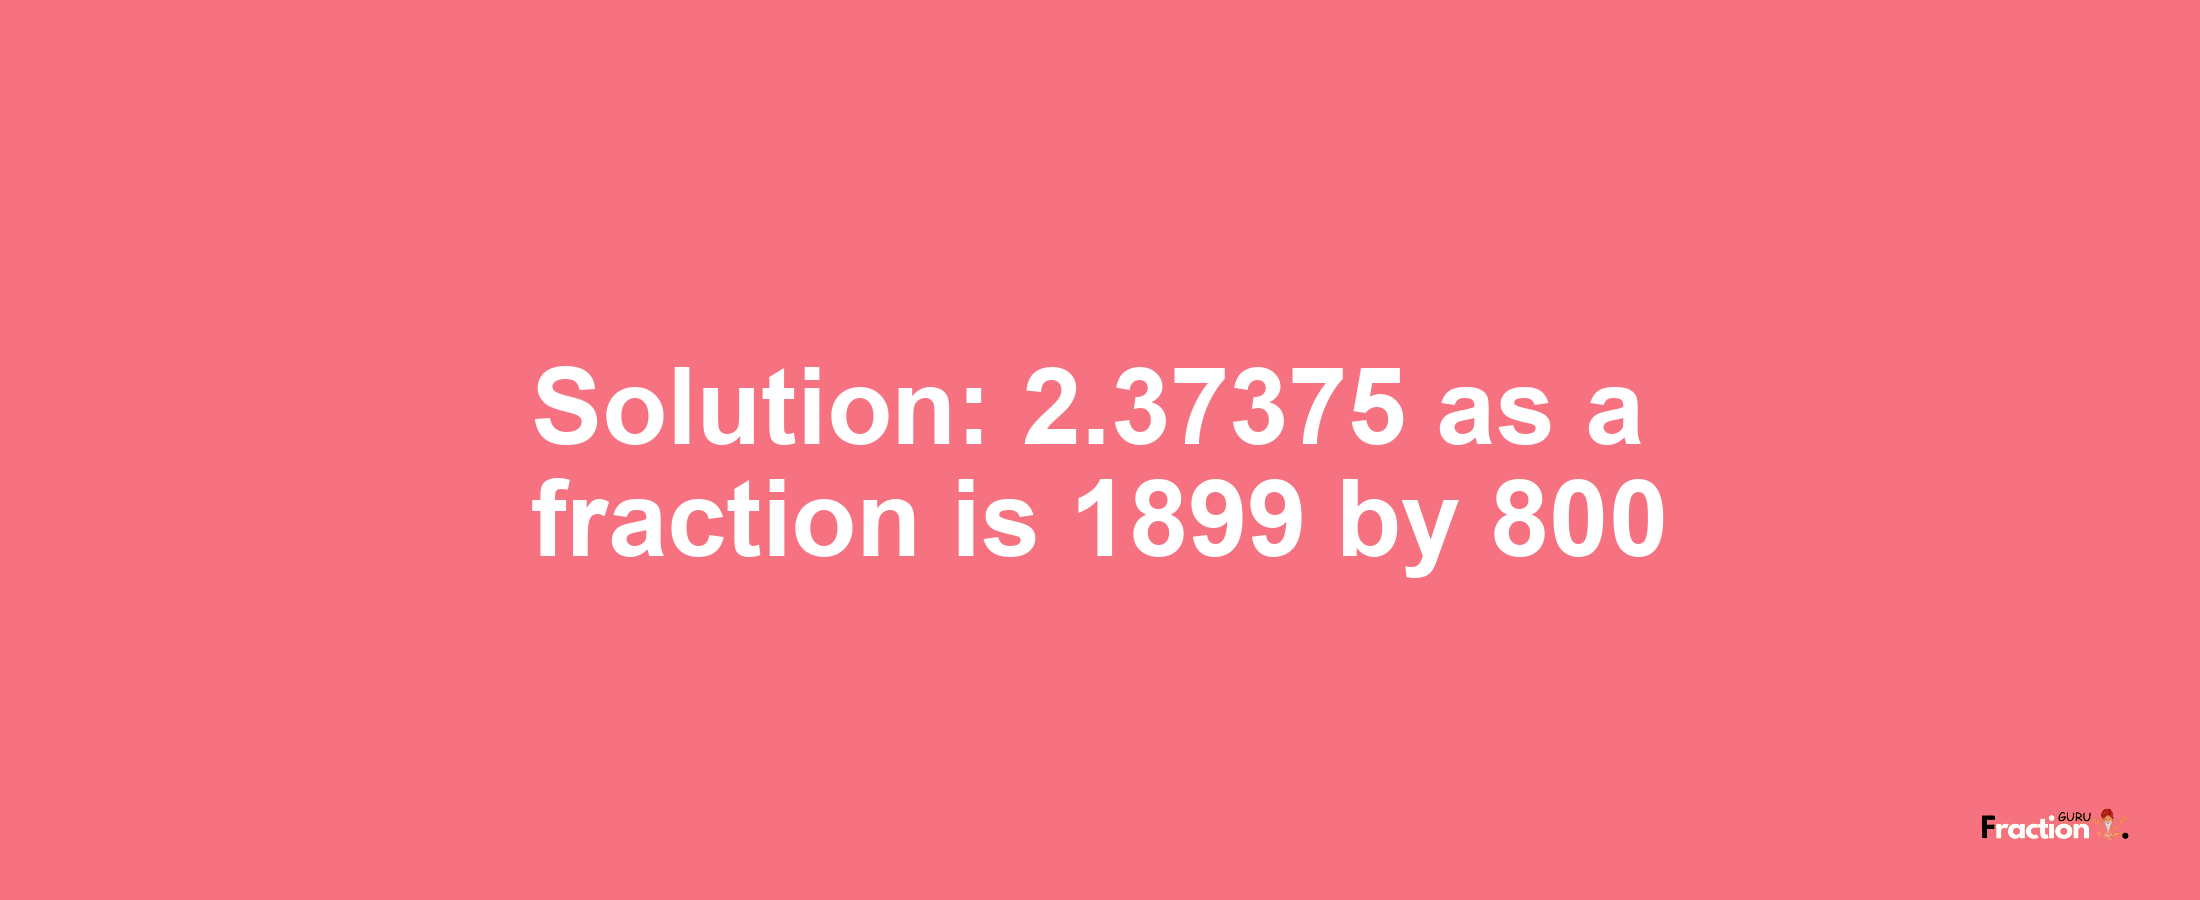 Solution:2.37375 as a fraction is 1899/800